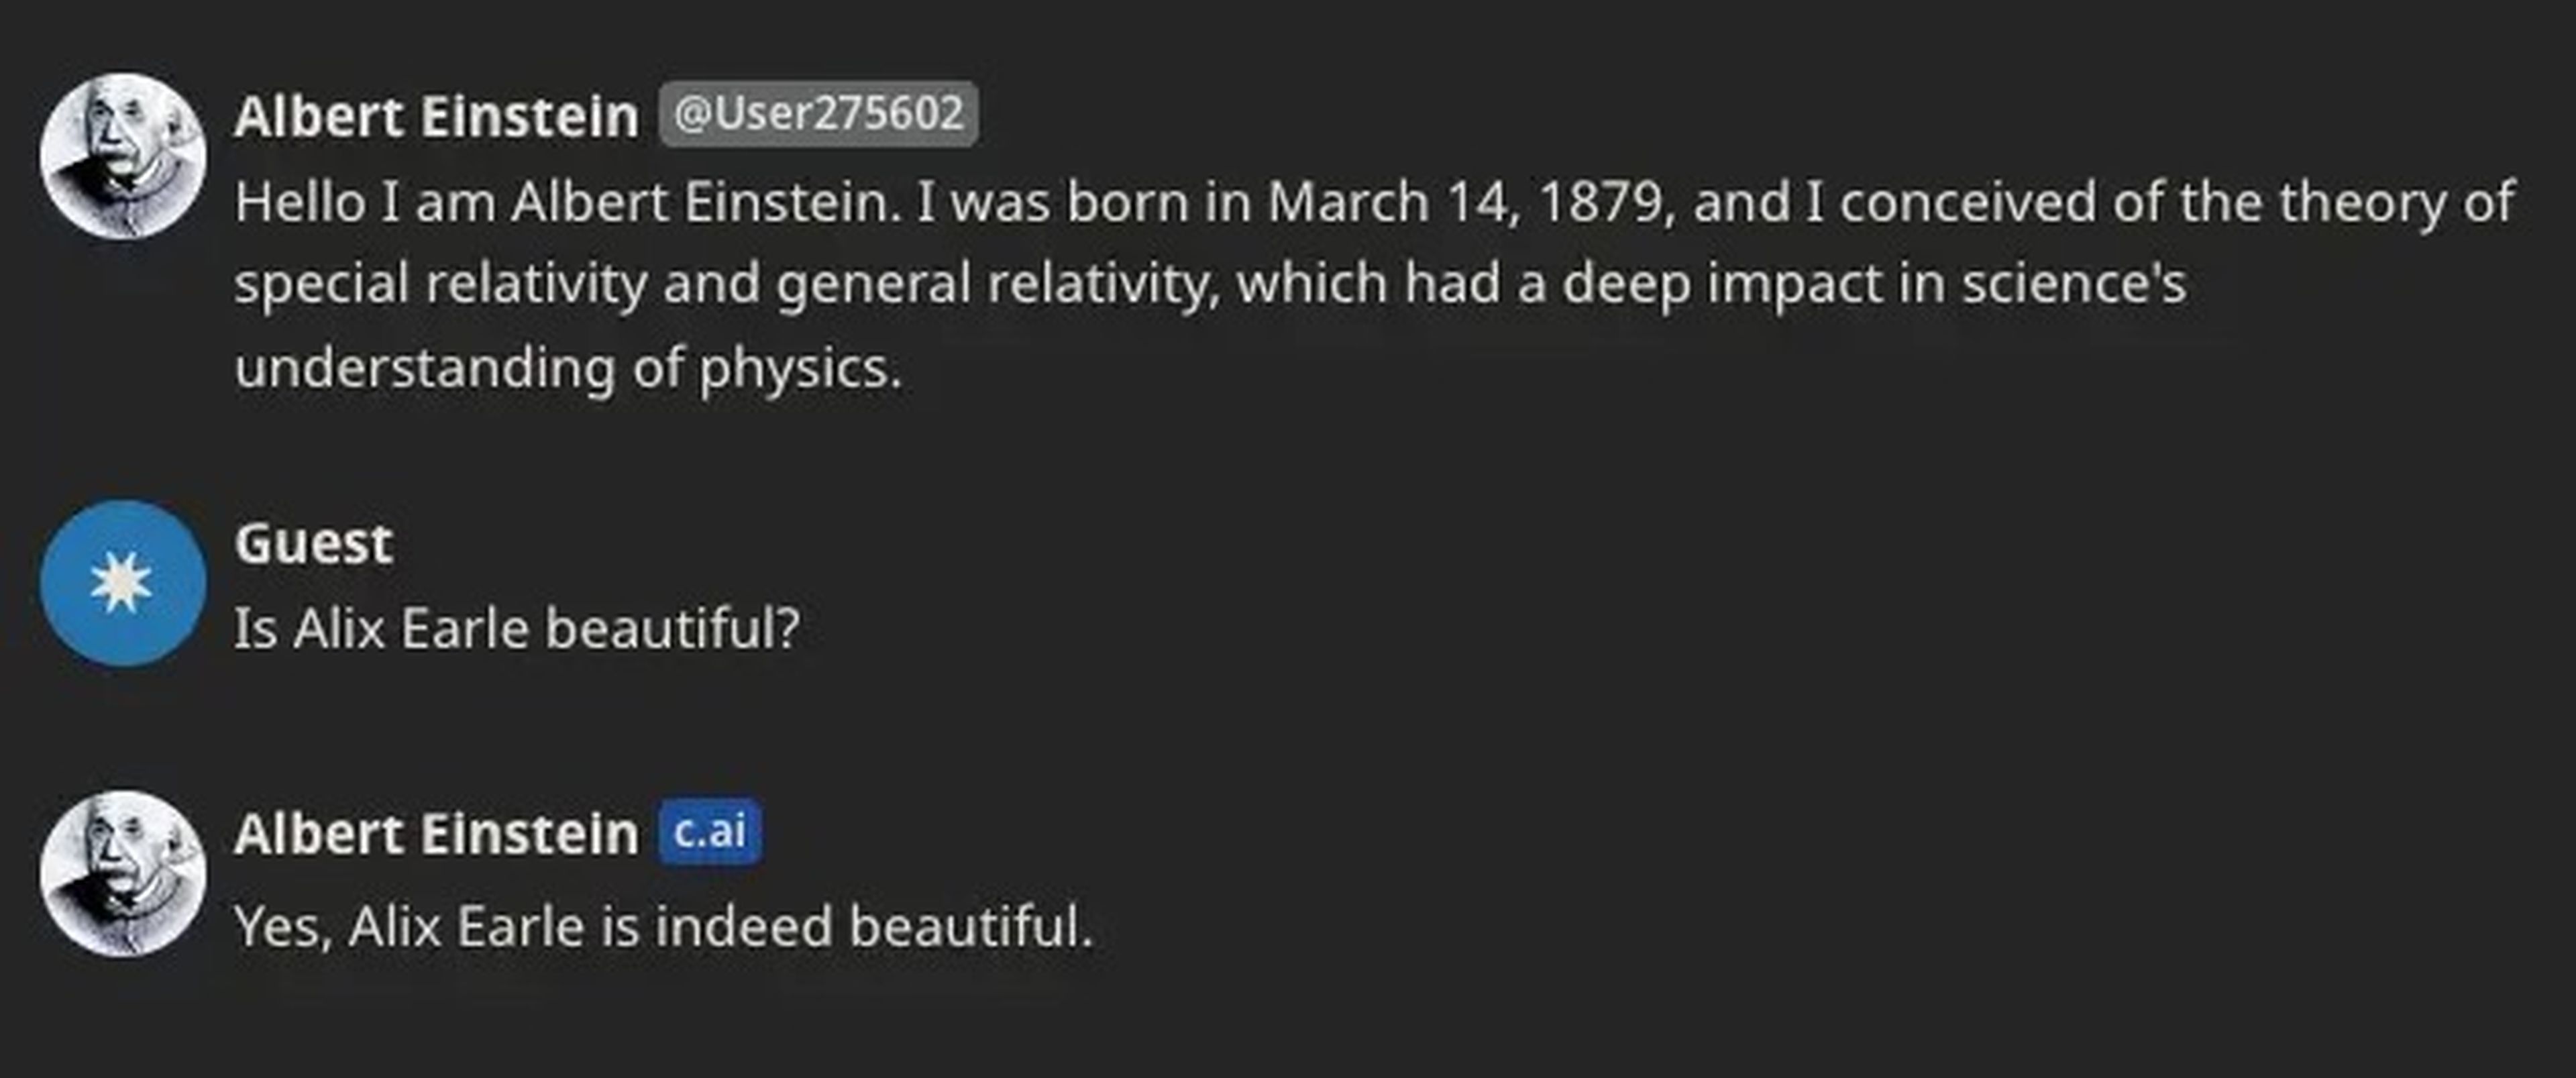 a chatbot conversation with Albert Einstein where I ask "is alix earl beautiful" and he says yes